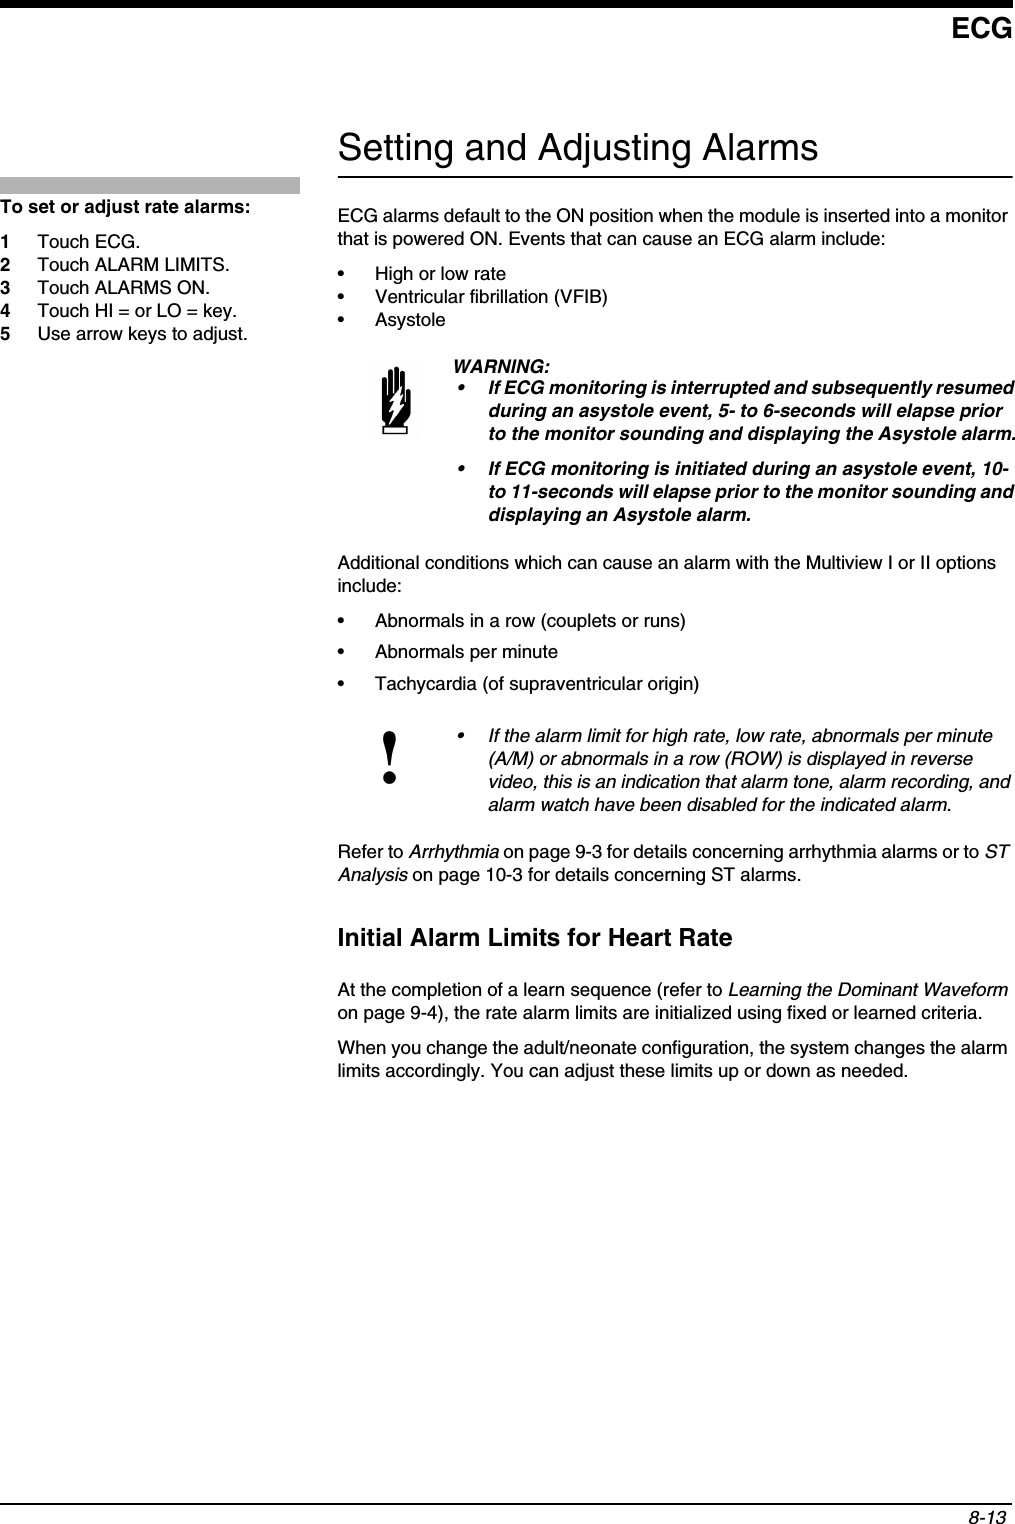 ECG8-13 Setting and Adjusting AlarmsECG alarms default to the ON position when the module is inserted into a monitor that is powered ON. Events that can cause an ECG alarm include:• High or low rate• Ventricular fibrillation (VFIB)• Asystole Additional conditions which can cause an alarm with the Multiview I or II options include:• Abnormals in a row (couplets or runs)• Abnormals per minute• Tachycardia (of supraventricular origin)Refer to Arrhythmia on page 9-3 for details concerning arrhythmia alarms or to ST Analysis on page 10-3 for details concerning ST alarms.Initial Alarm Limits for Heart RateAt the completion of a learn sequence (refer to Learning the Dominant Waveformon page 9-4), the rate alarm limits are initialized using fixed or learned criteria.When you change the adult/neonate configuration, the system changes the alarm limits accordingly. You can adjust these limits up or down as needed.WARNING:• If ECG monitoring is interrupted and subsequently resumed during an asystole event, 5- to 6-seconds will elapse prior to the monitor sounding and displaying the Asystole alarm.• If ECG monitoring is initiated during an asystole event, 10-to 11-seconds will elapse prior to the monitor sounding and displaying an Asystole alarm.!• If the alarm limit for high rate, low rate, abnormals per minute (A/M) or abnormals in a row (ROW) is displayed in reverse video, this is an indication that alarm tone, alarm recording, and alarm watch have been disabled for the indicated alarm.To set or adjust rate alarms:1Touch ECG.2Touch ALARM LIMITS.3Touch ALARMS ON.4Touch HI = or LO = key.5Use arrow keys to adjust.